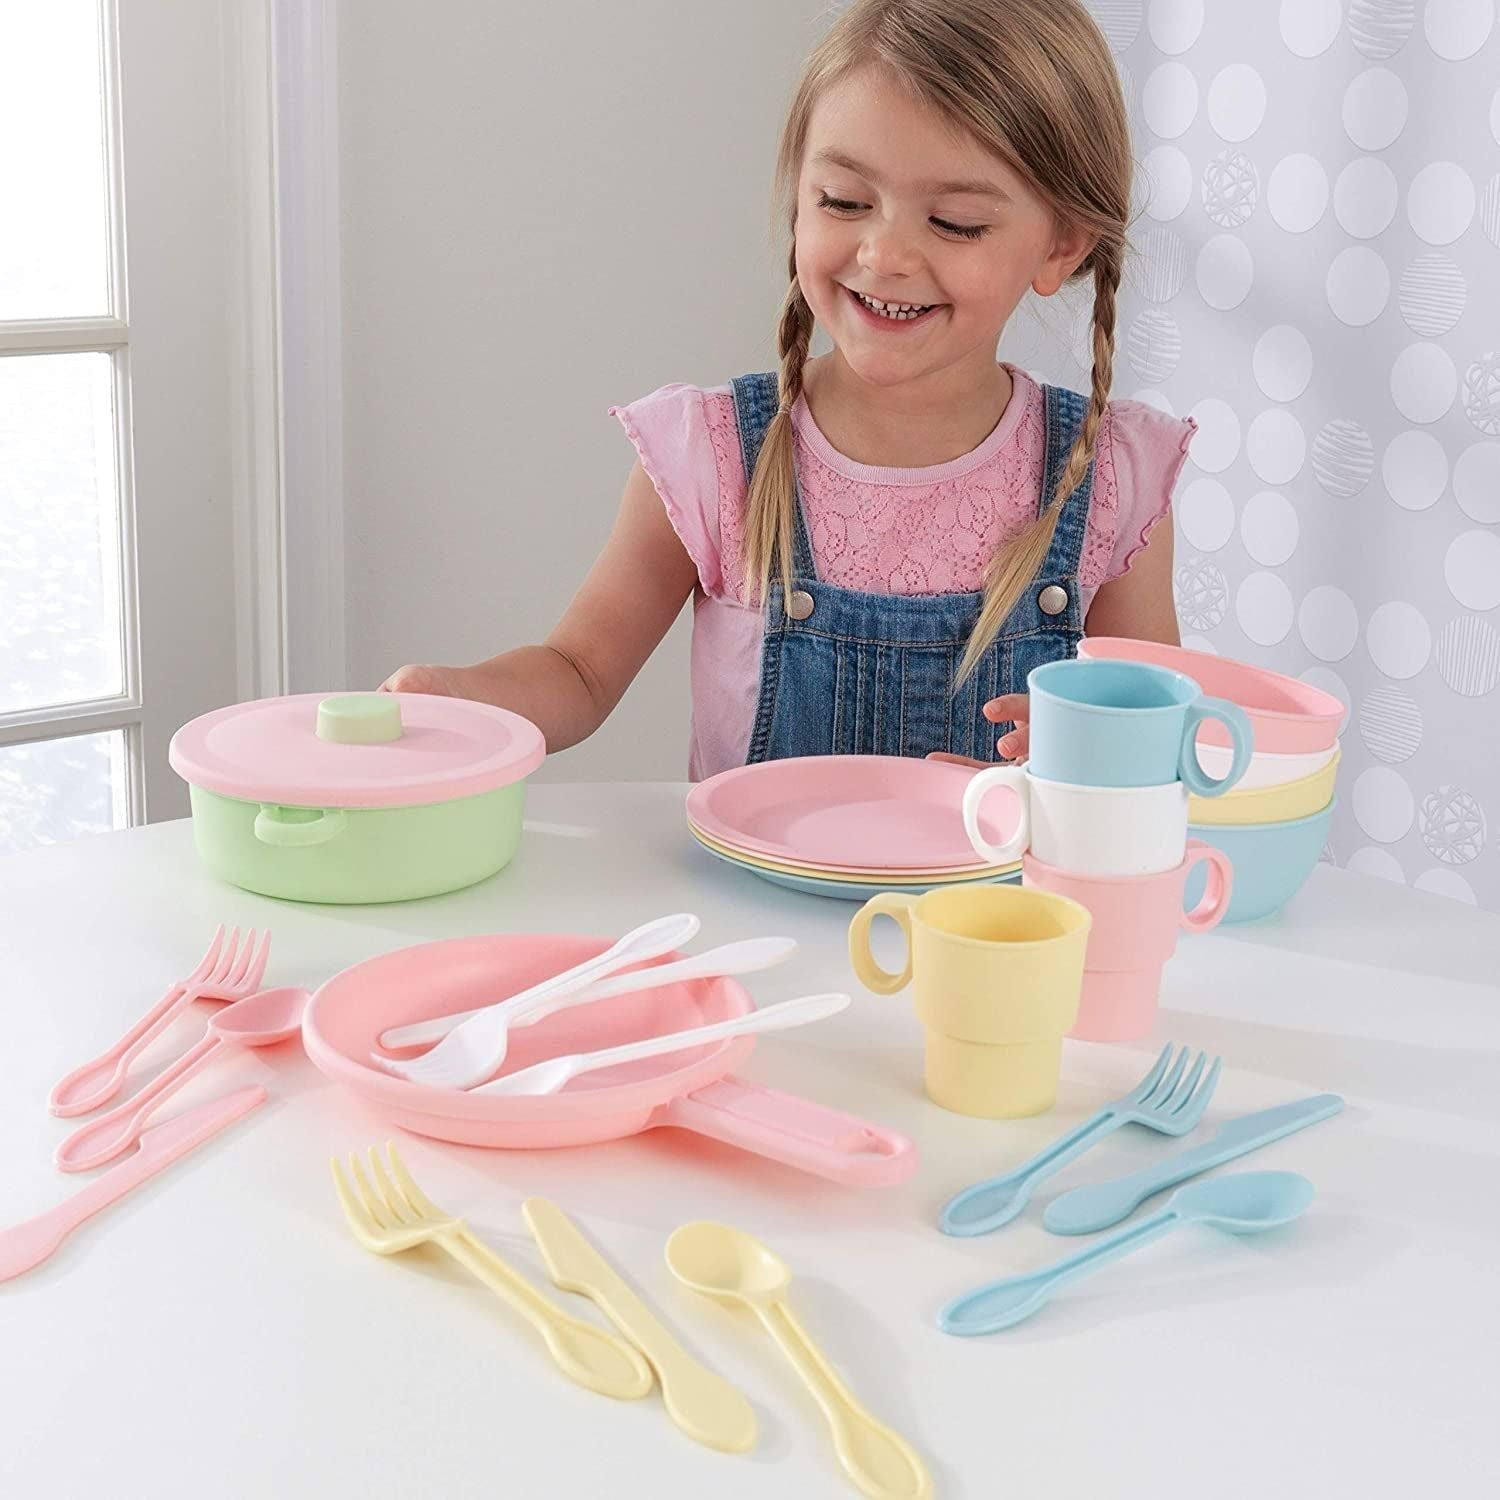 27-Piece Pastel Cookware Set, Plastic Dishes and Utensils for Play Kitchens, Gift for Ages 18 Mo+